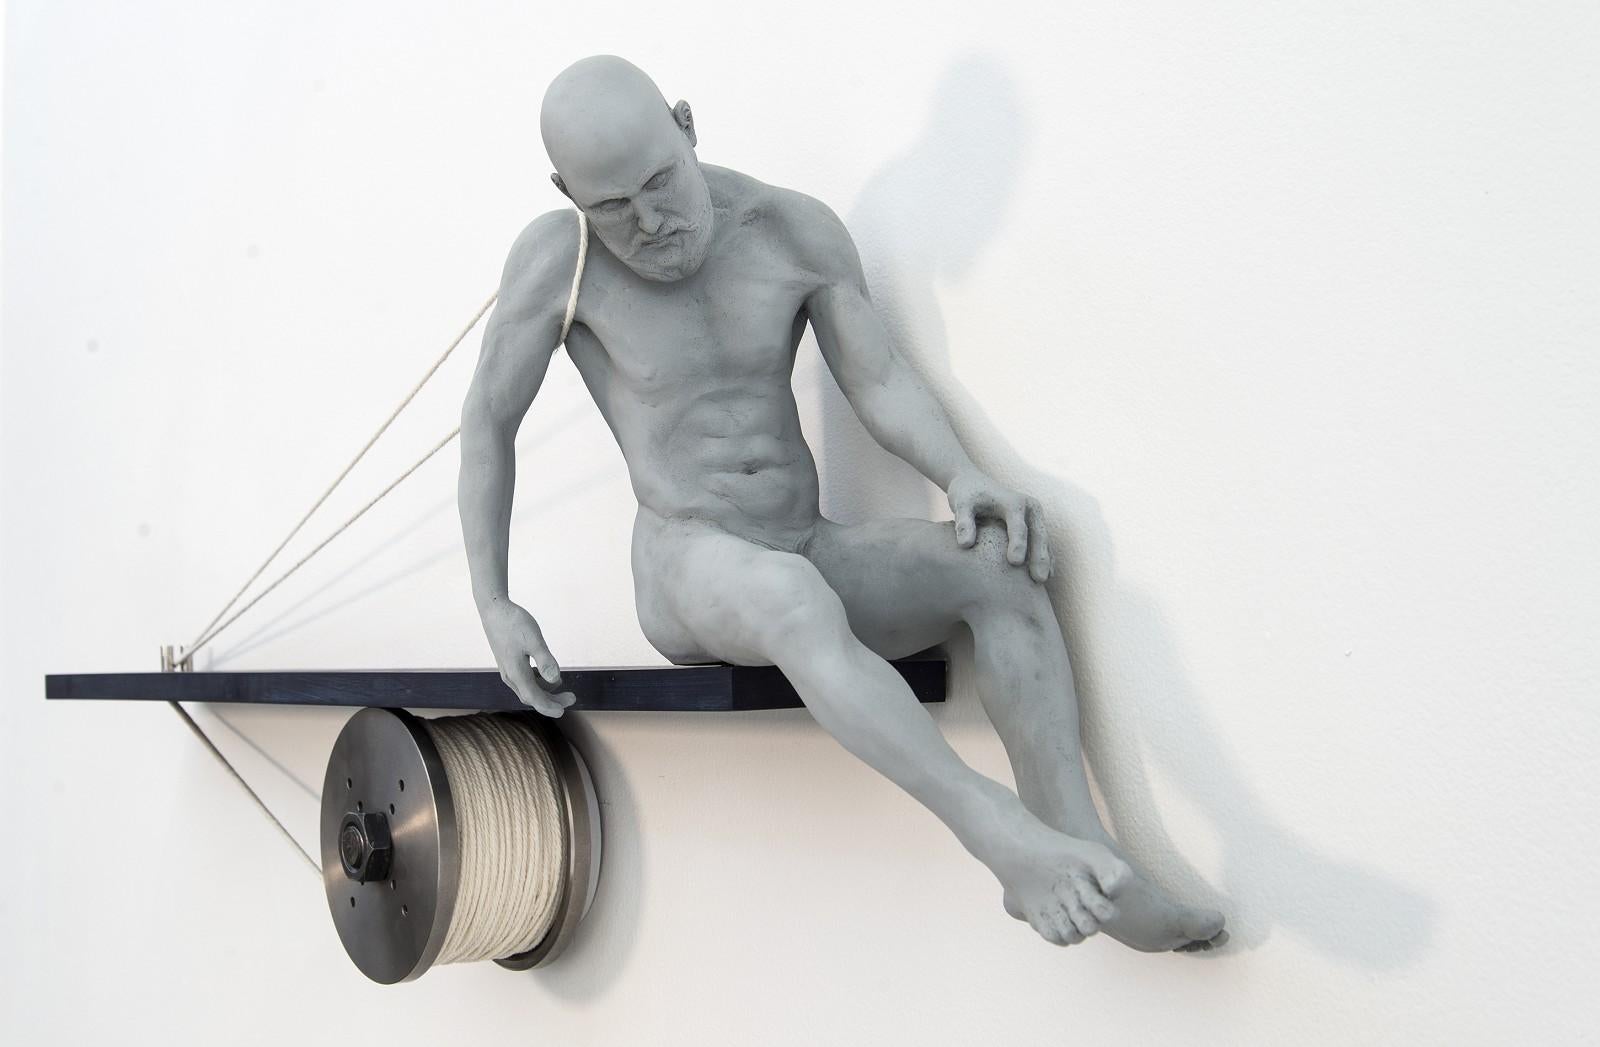 Tethered 1/9 - poised, male, nude, figure, mixed media, wall sculpture - Sculpture by W.W. Hung